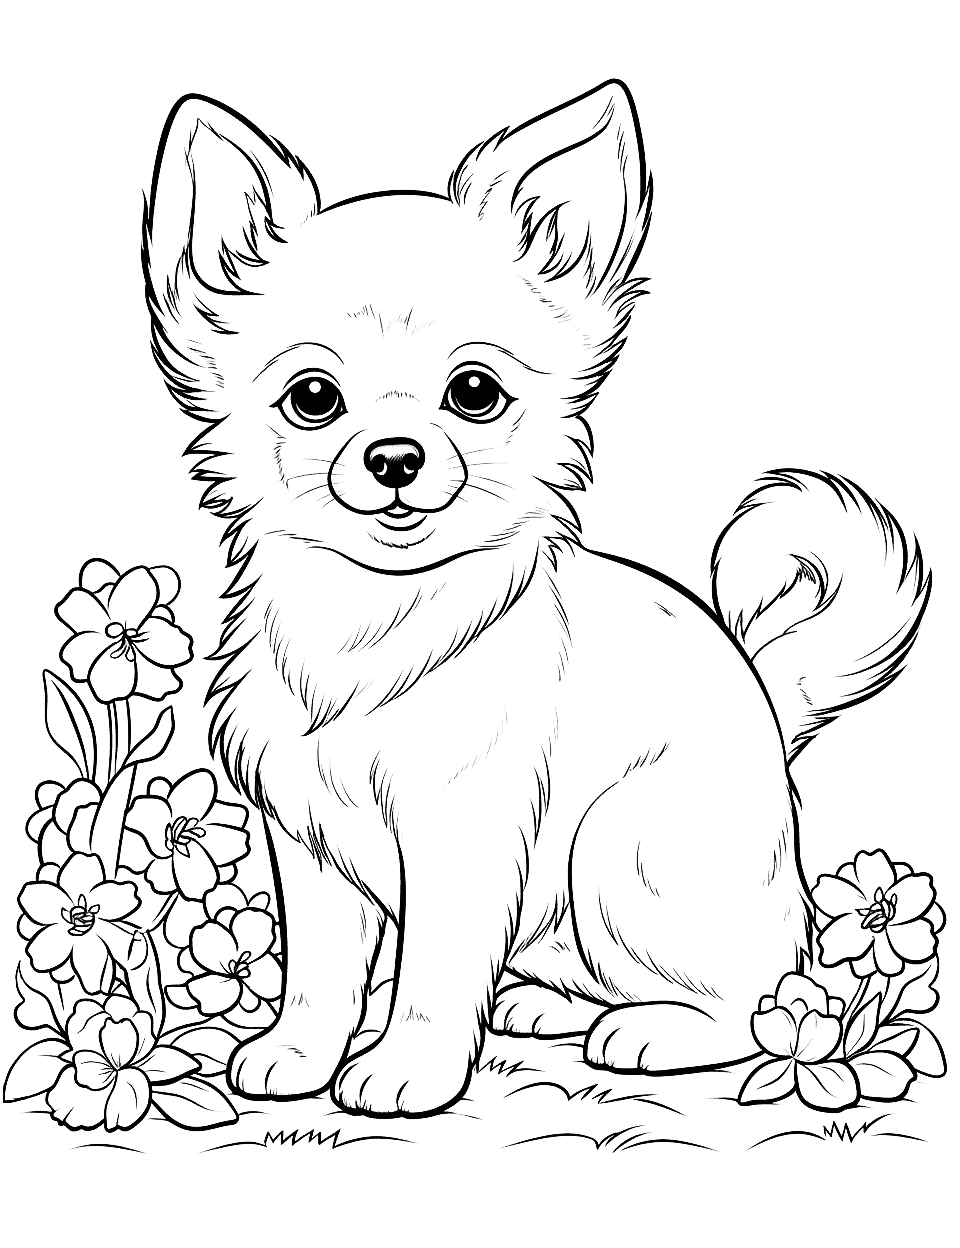 Spring Blooms Pomeranian in a Meadow Puppy Coloring Page - A Pomeranian puppy playing in a meadow full of spring flowers.